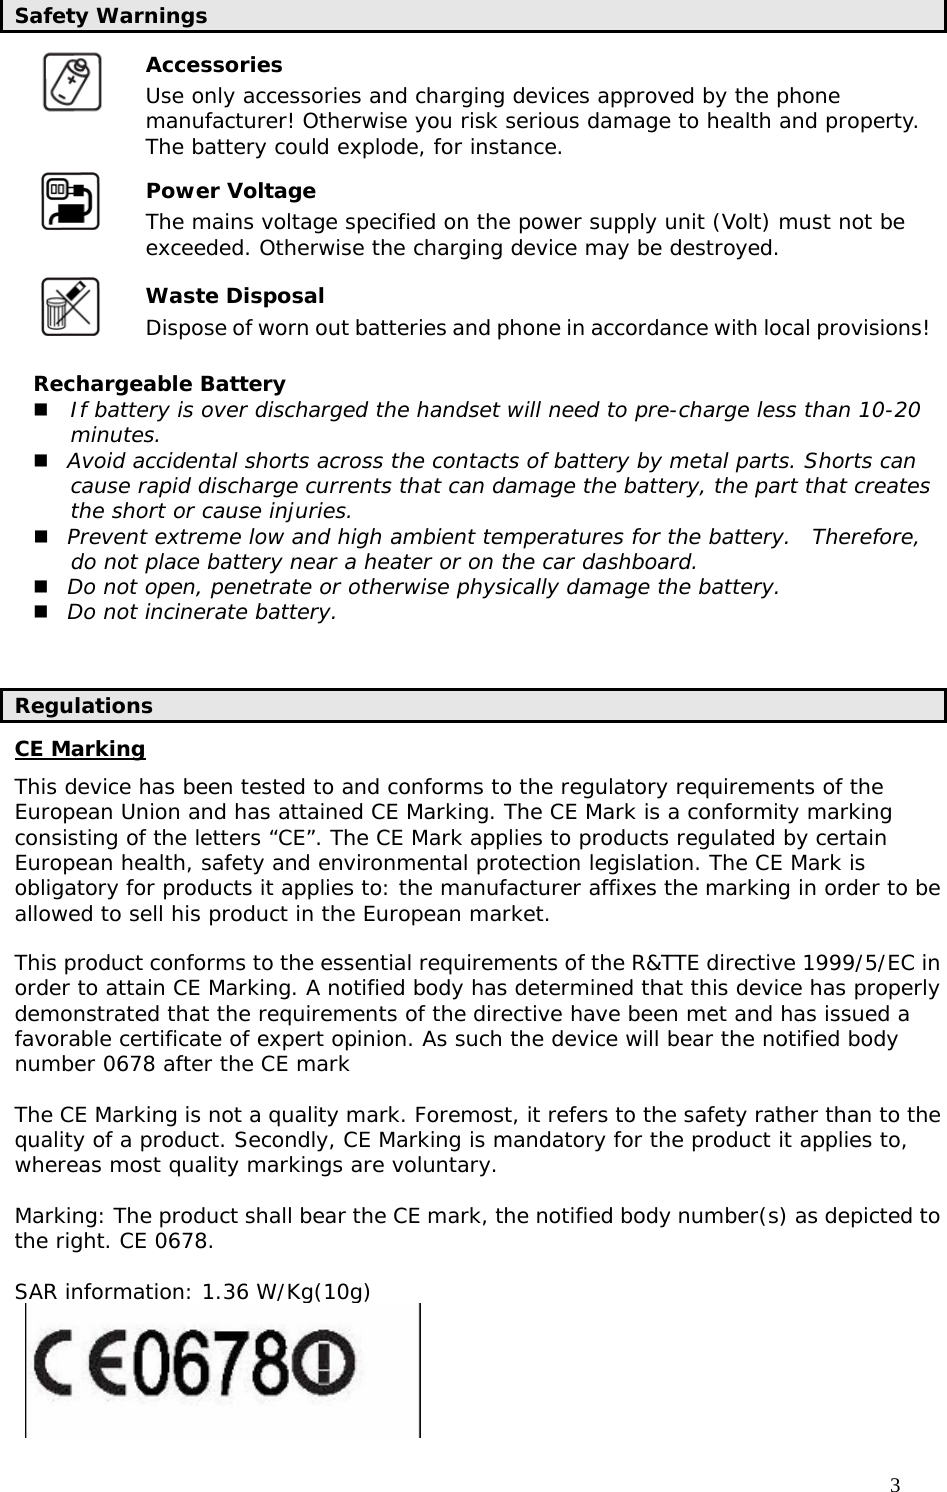                                     3 Safety Warnings Accessories  Use only accessories and charging devices approved by the phone manufacturer! Otherwise you risk serious damage to health and property. The battery could explode, for instance. Power Voltage   The mains voltage specified on the power supply unit (Volt) must not be exceeded. Otherwise the charging device may be destroyed. Waste Disposal   Dispose of worn out batteries and phone in accordance with local provisions! Rechargeable Battery  If battery is over discharged the handset will need to pre-charge less than 10-20 minutes.  Avoid accidental shorts across the contacts of battery by metal parts. Shorts can cause rapid discharge currents that can damage the battery, the part that creates the short or cause injuries.  Prevent extreme low and high ambient temperatures for the battery.  Therefore, do not place battery near a heater or on the car dashboard.  Do not open, penetrate or otherwise physically damage the battery.  Do not incinerate battery.   Regulations CE Marking This device has been tested to and conforms to the regulatory requirements of the European Union and has attained CE Marking. The CE Mark is a conformity marking consisting of the letters “CE”. The CE Mark applies to products regulated by certain European health, safety and environmental protection legislation. The CE Mark is obligatory for products it applies to: the manufacturer affixes the marking in order to be allowed to sell his product in the European market.  This product conforms to the essential requirements of the R&amp;TTE directive 1999/5/EC in order to attain CE Marking. A notified body has determined that this device has properly demonstrated that the requirements of the directive have been met and has issued a favorable certificate of expert opinion. As such the device will bear the notified body number 0678 after the CE mark  The CE Marking is not a quality mark. Foremost, it refers to the safety rather than to the quality of a product. Secondly, CE Marking is mandatory for the product it applies to, whereas most quality markings are voluntary.  Marking: The product shall bear the CE mark, the notified body number(s) as depicted to the right. CE 0678.  SAR information: 1.36 W/Kg(10g)  